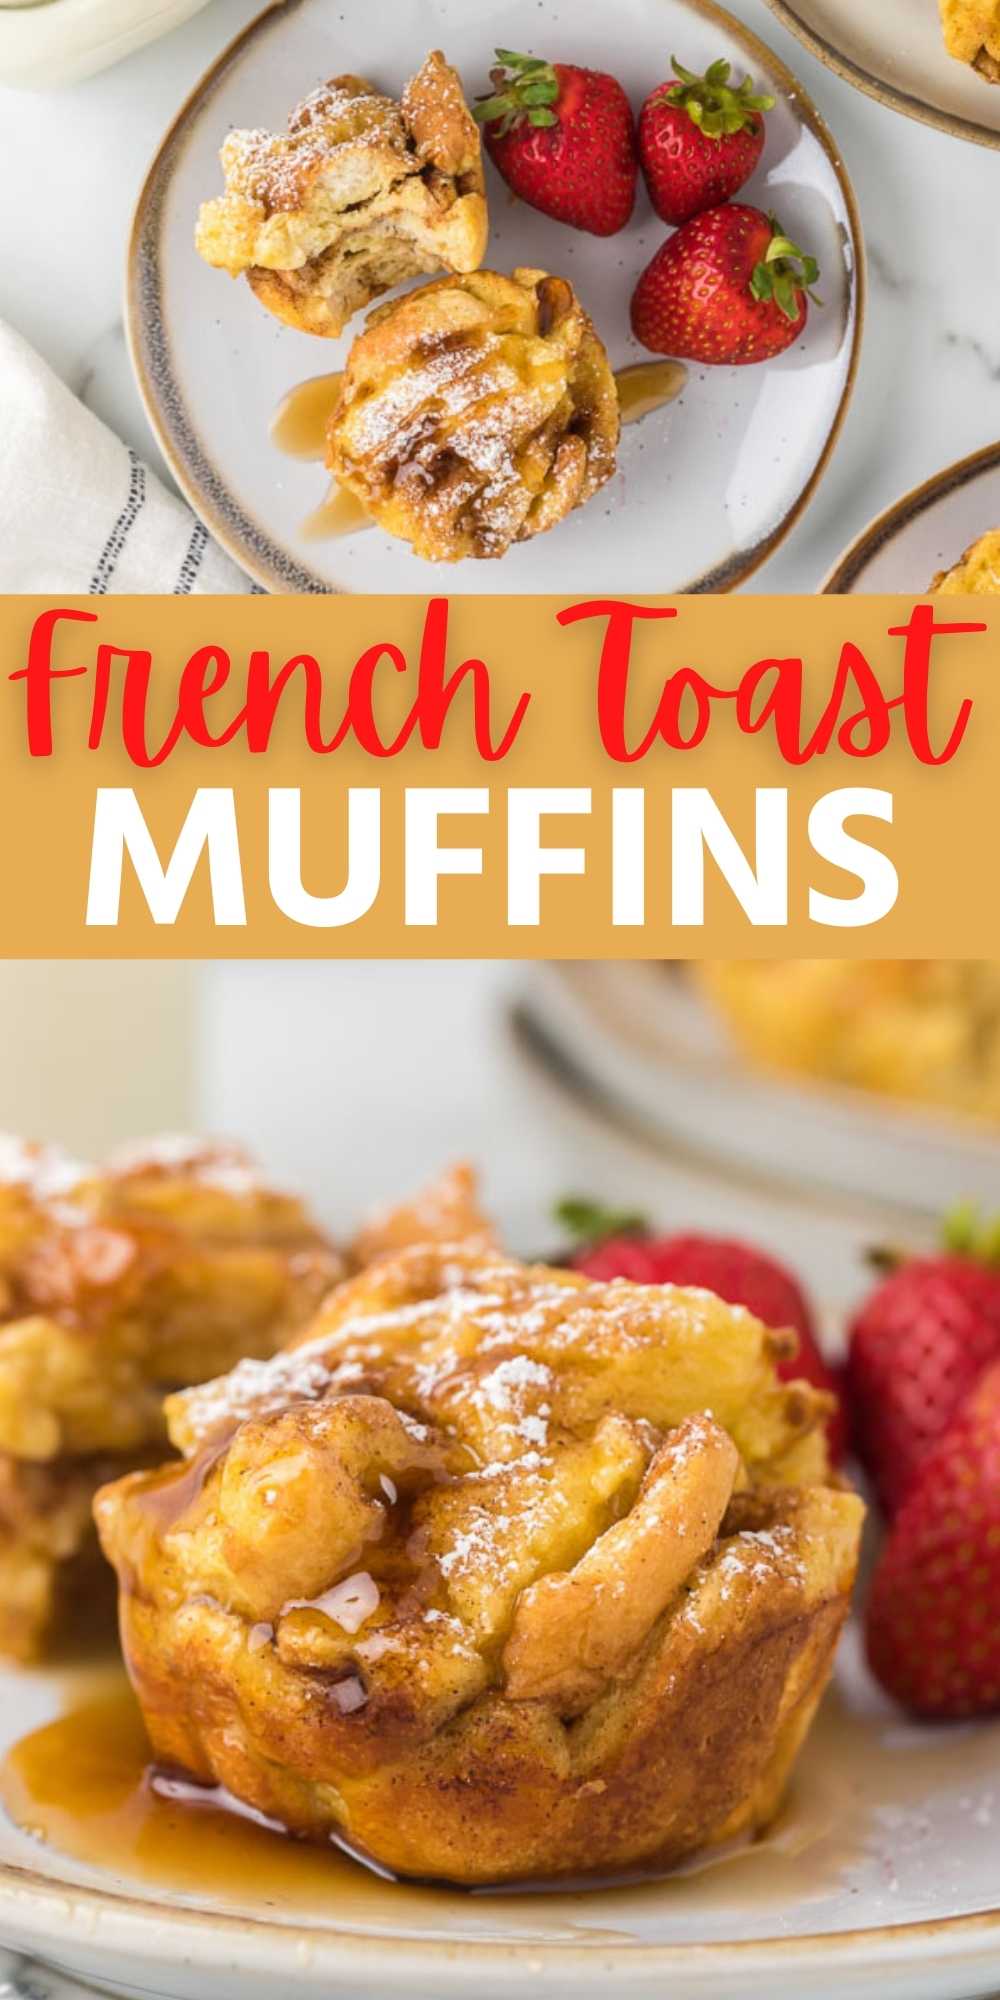 Do you love baked french toast? Try easy french toast muffins recipe. Get all the flavors of french toast with easy french toast muffins that are made in the oven.  You will love this easy breakfast recipe.  #eatingonadime #breakfastrecipes #frenchtoast 